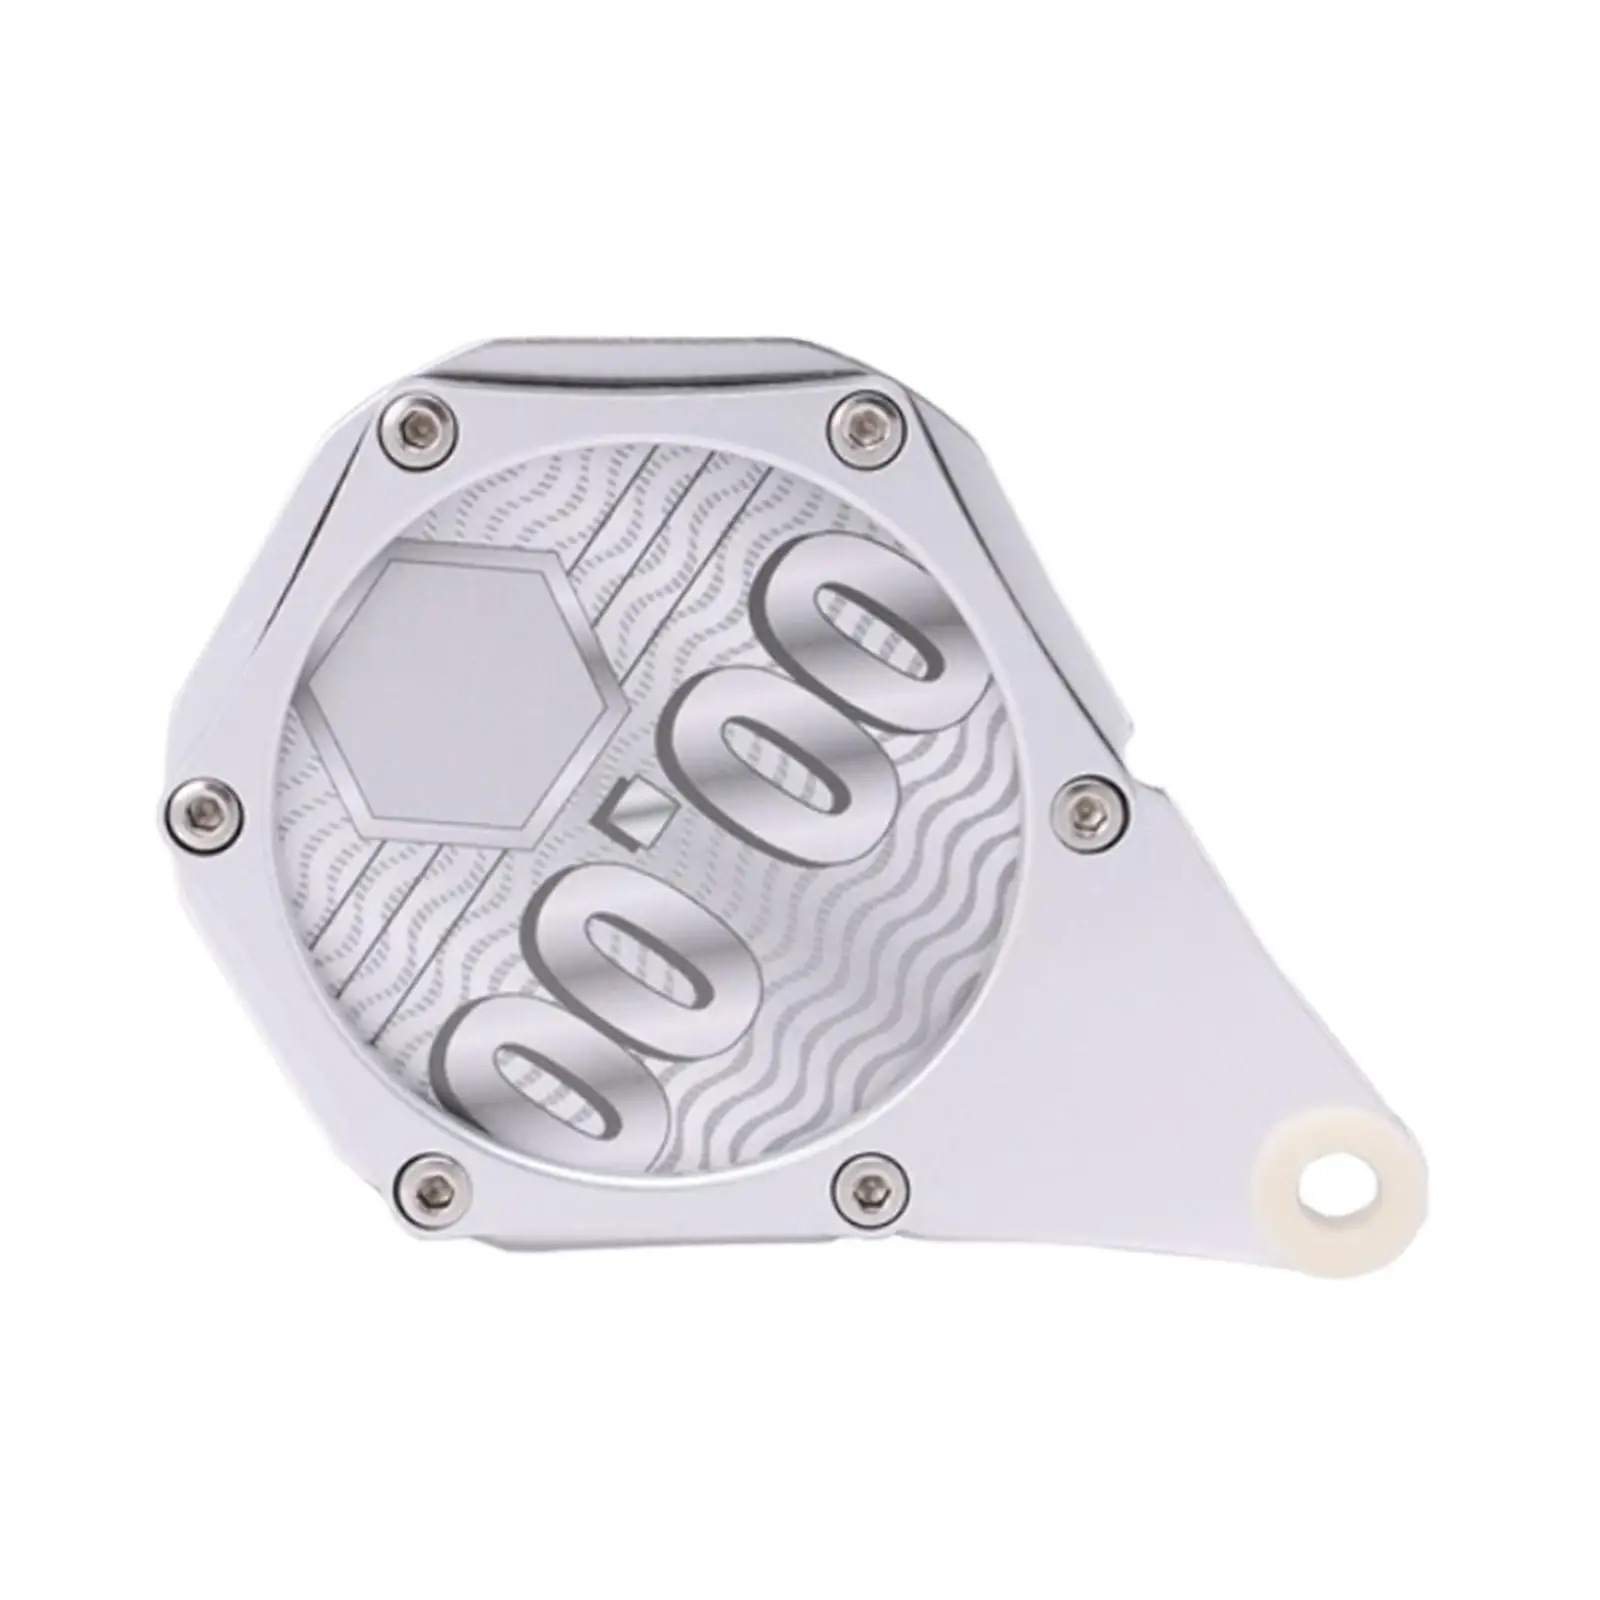 Hexagon Tax Disc Plate Motorcycle Accessories for Motor Replacement